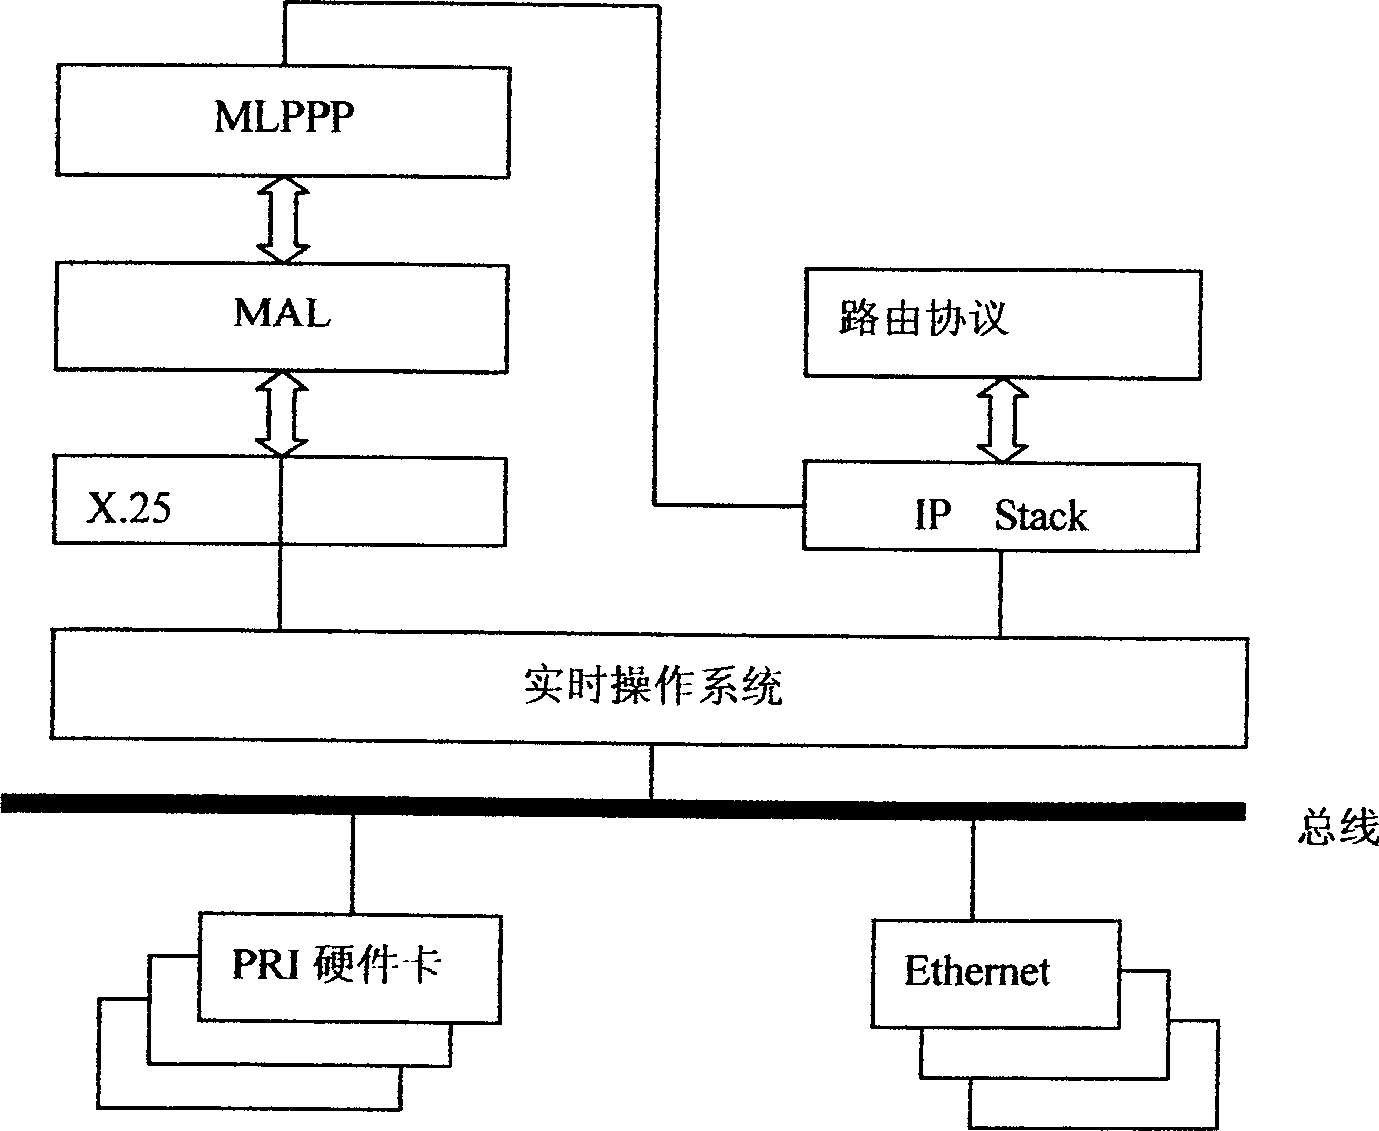 Method of implementing transmission of wireless PHS packet data